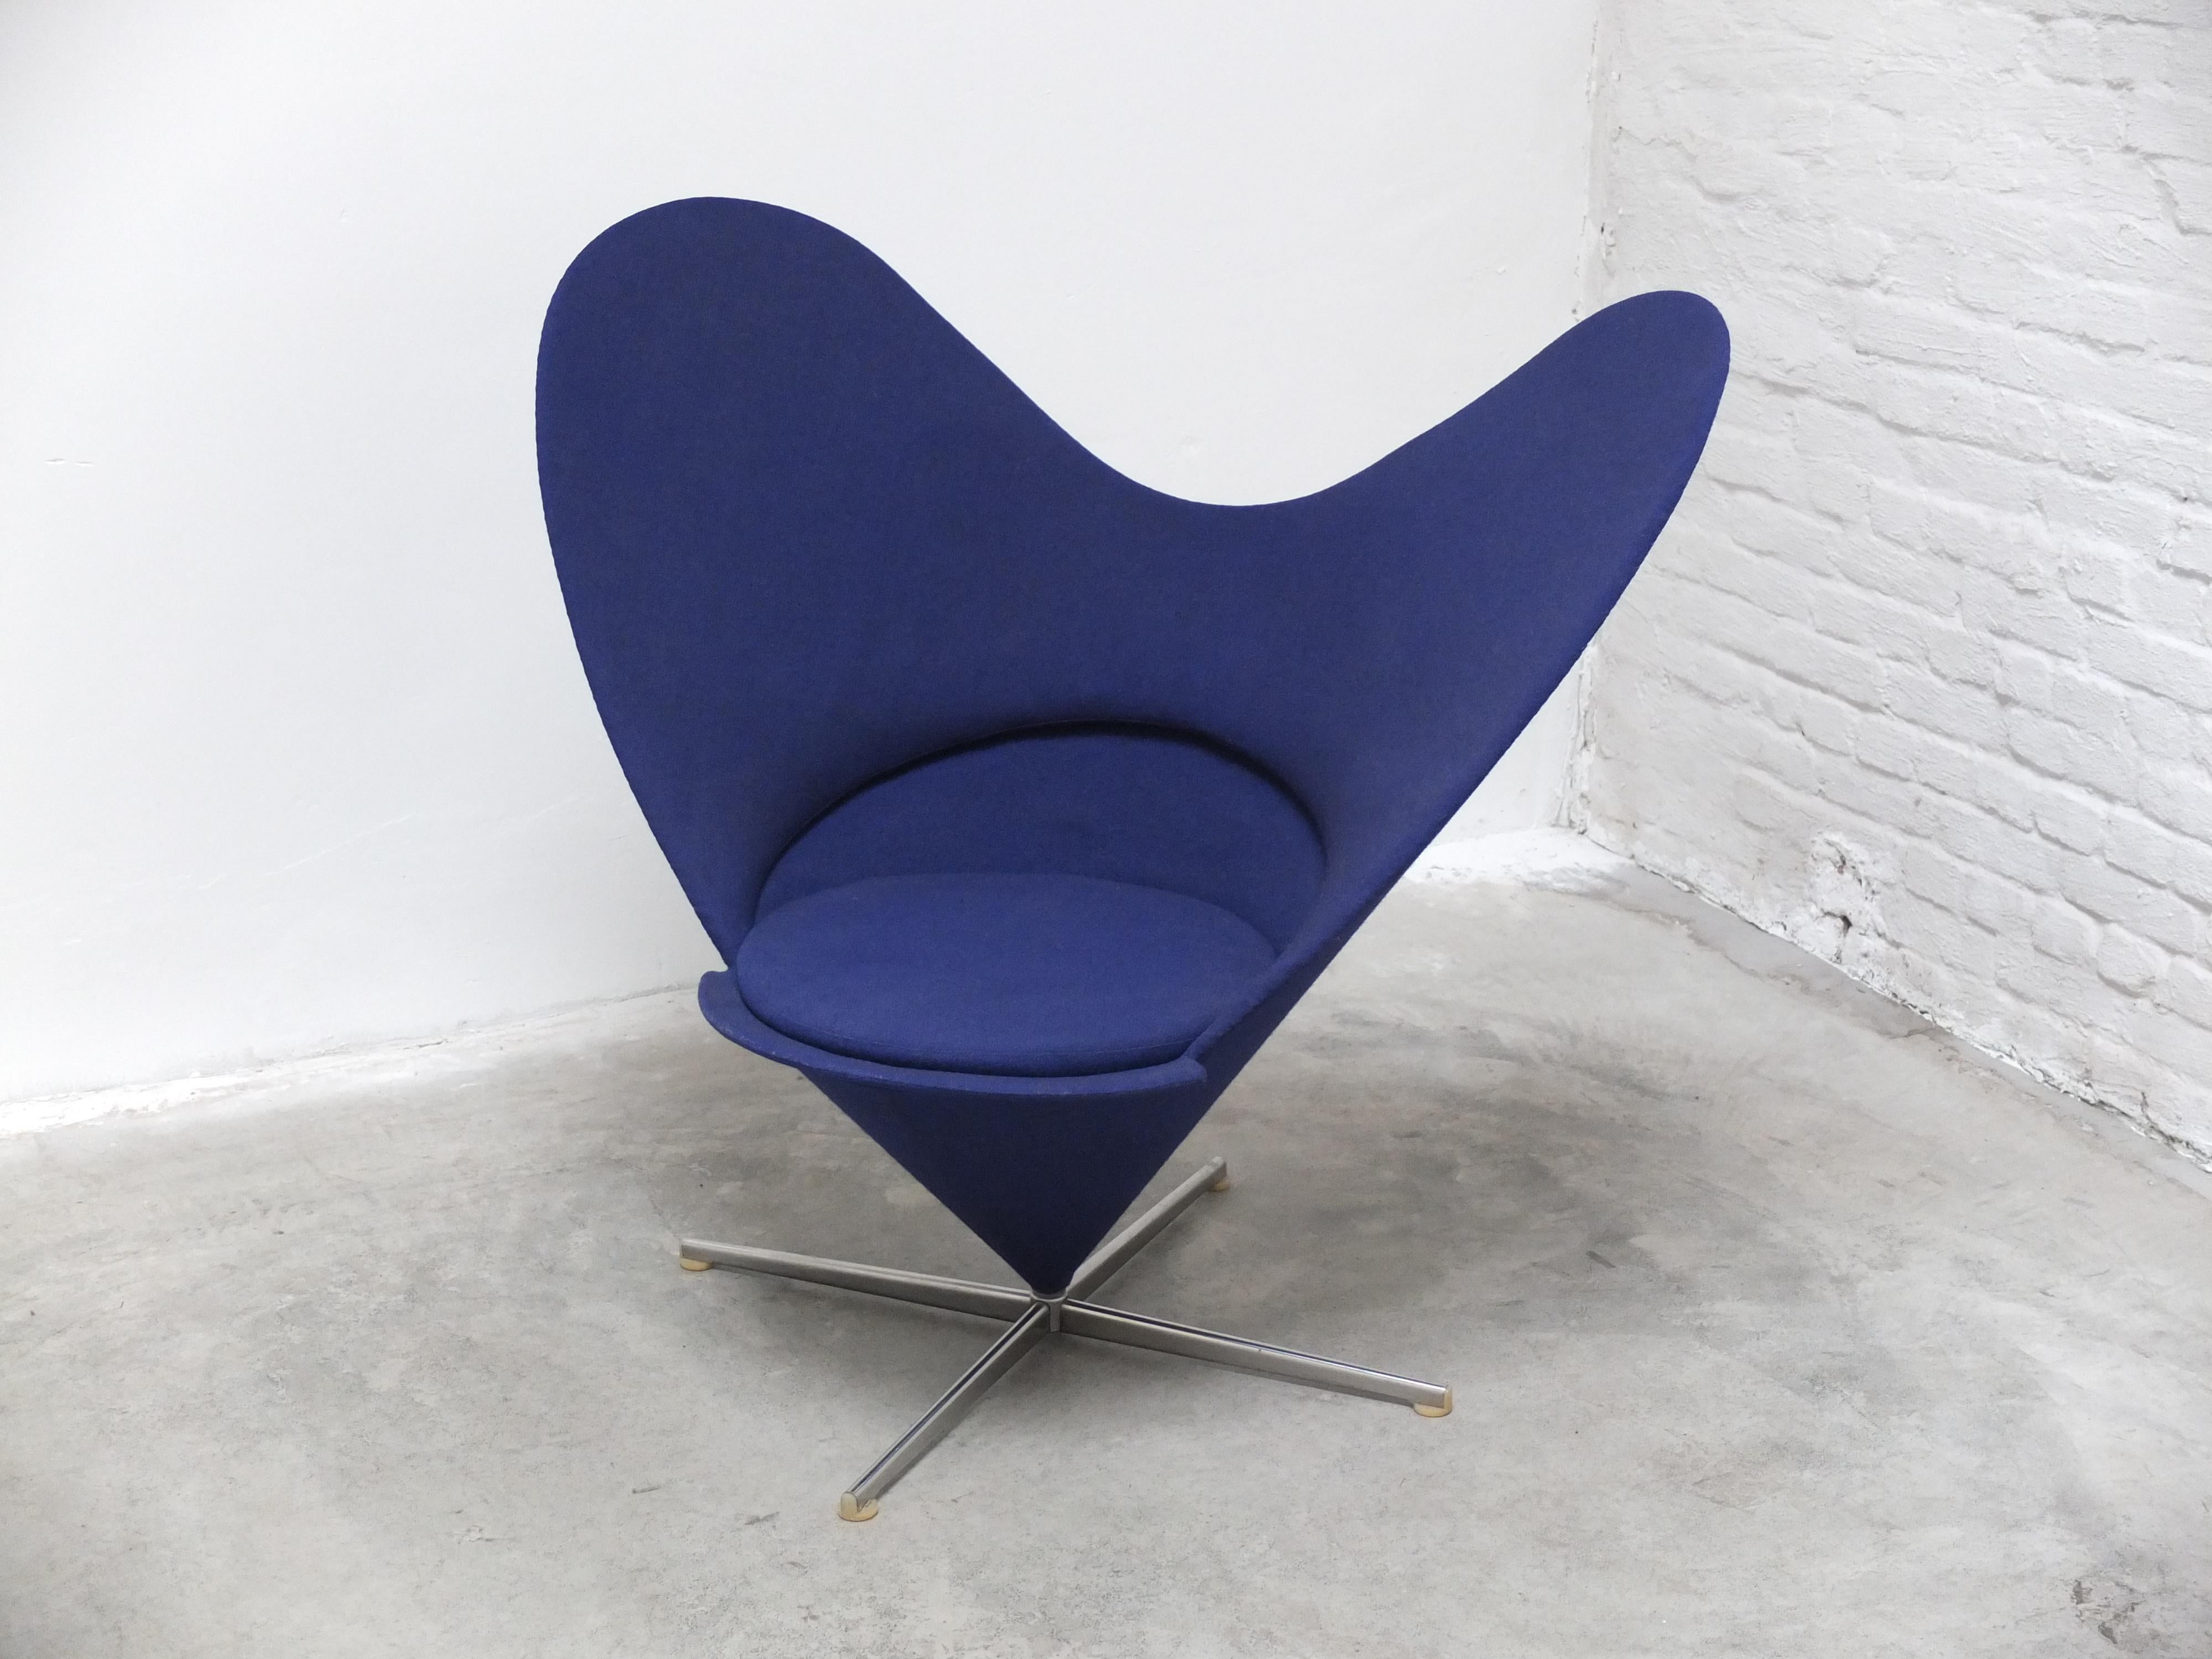 Danish Iconic 'Heart Cone' Chair by Verner Panton for Plus Linje, 1958 For Sale